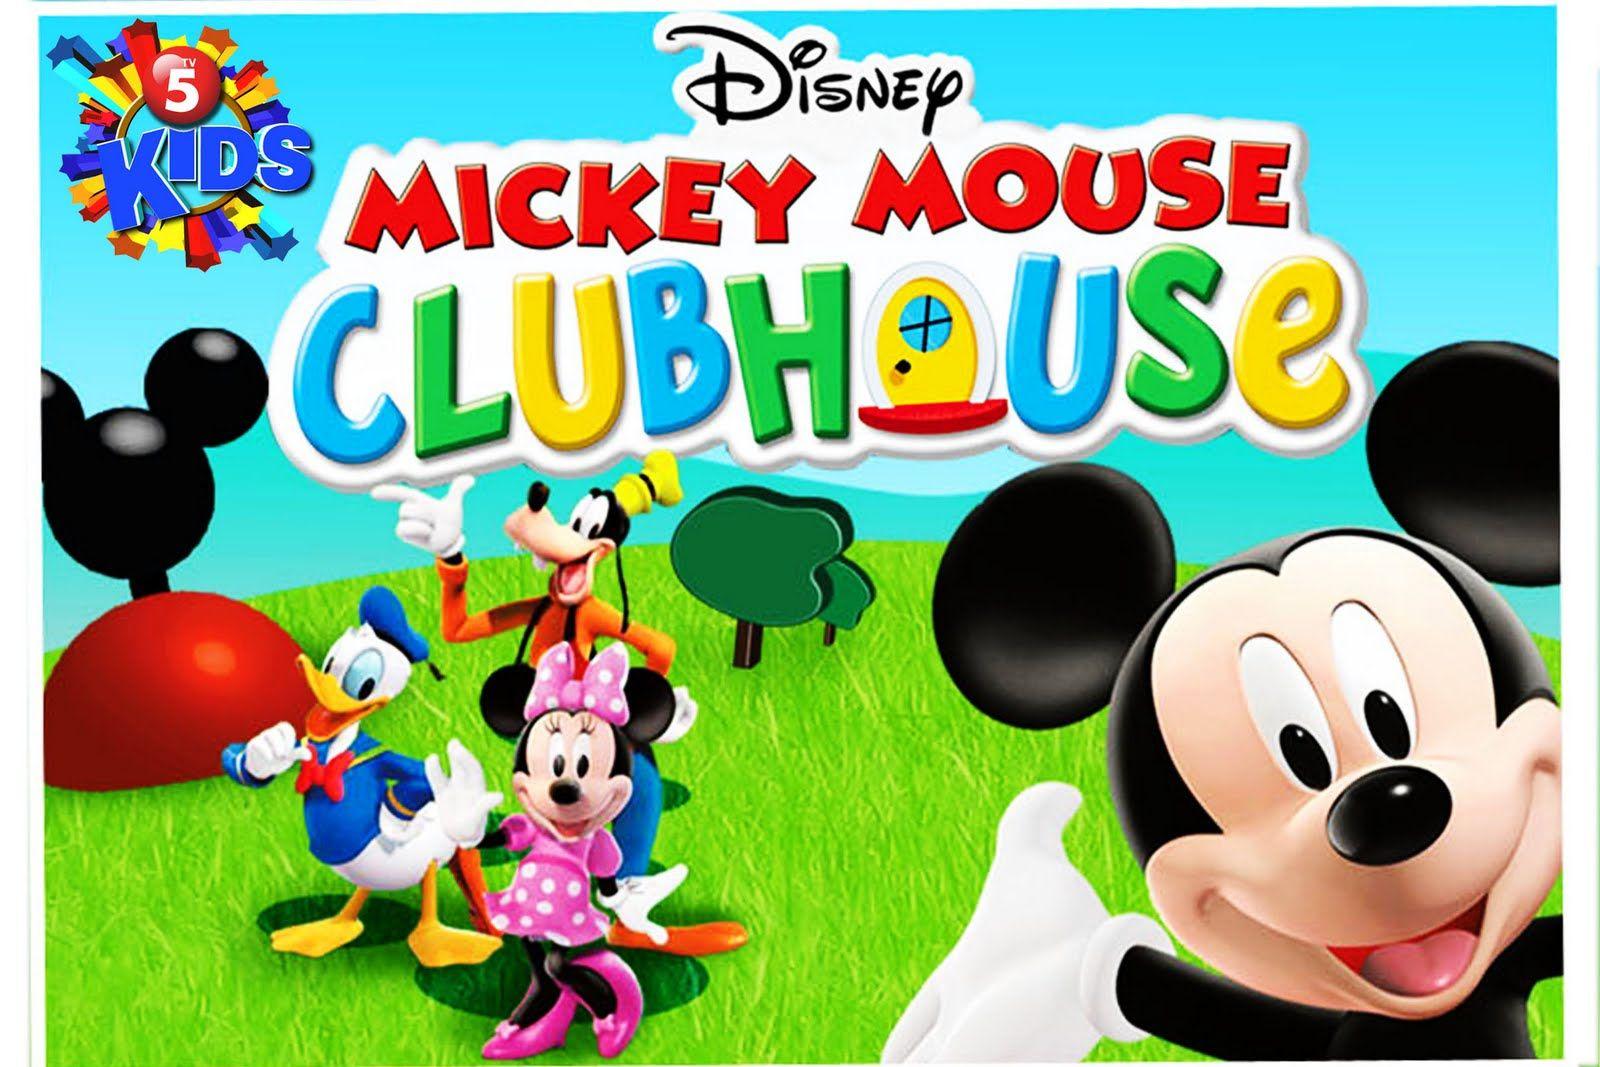 Mickey Mouse Clubhouse. Corduroy (TV series)